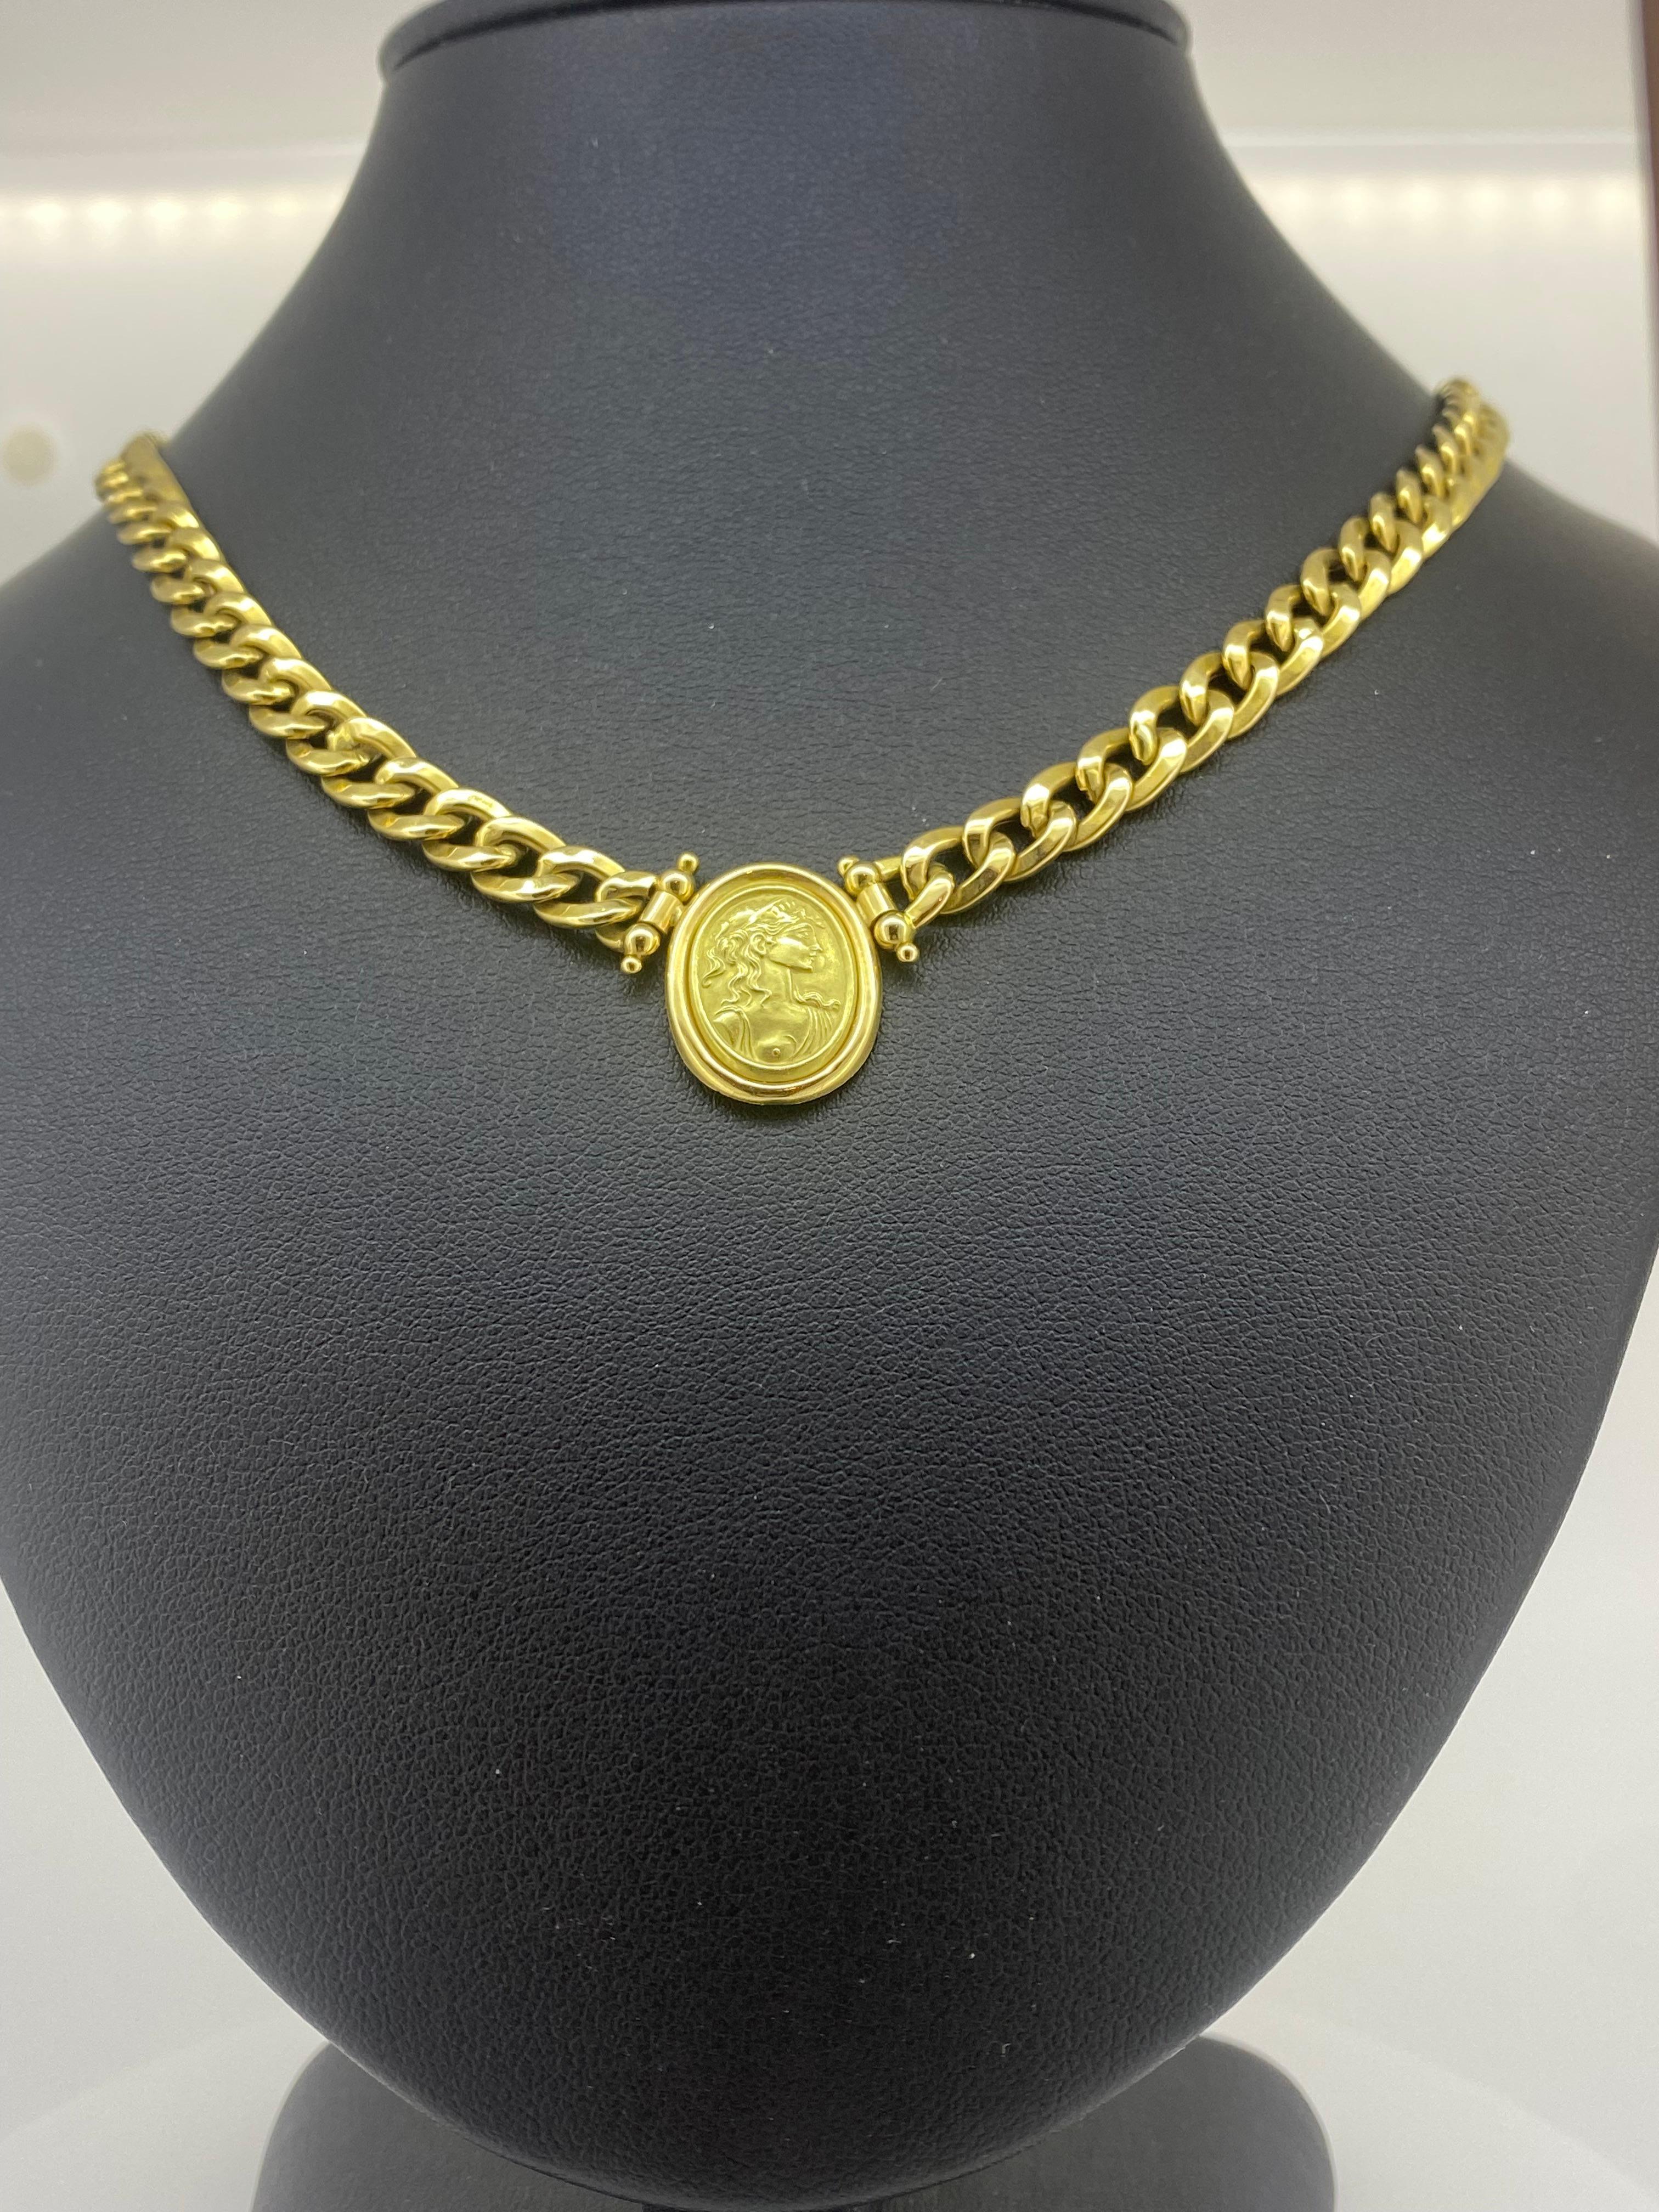 This Italian vintage necklace is a treasure to behold:

Crafted from 18K yellow gold, 
it features a stunning cameo pendant, 
that measures 18mm x 14mm &
stamped 750 to the reserve.
The framed pendant is embossed with a portrait of Roman lady,